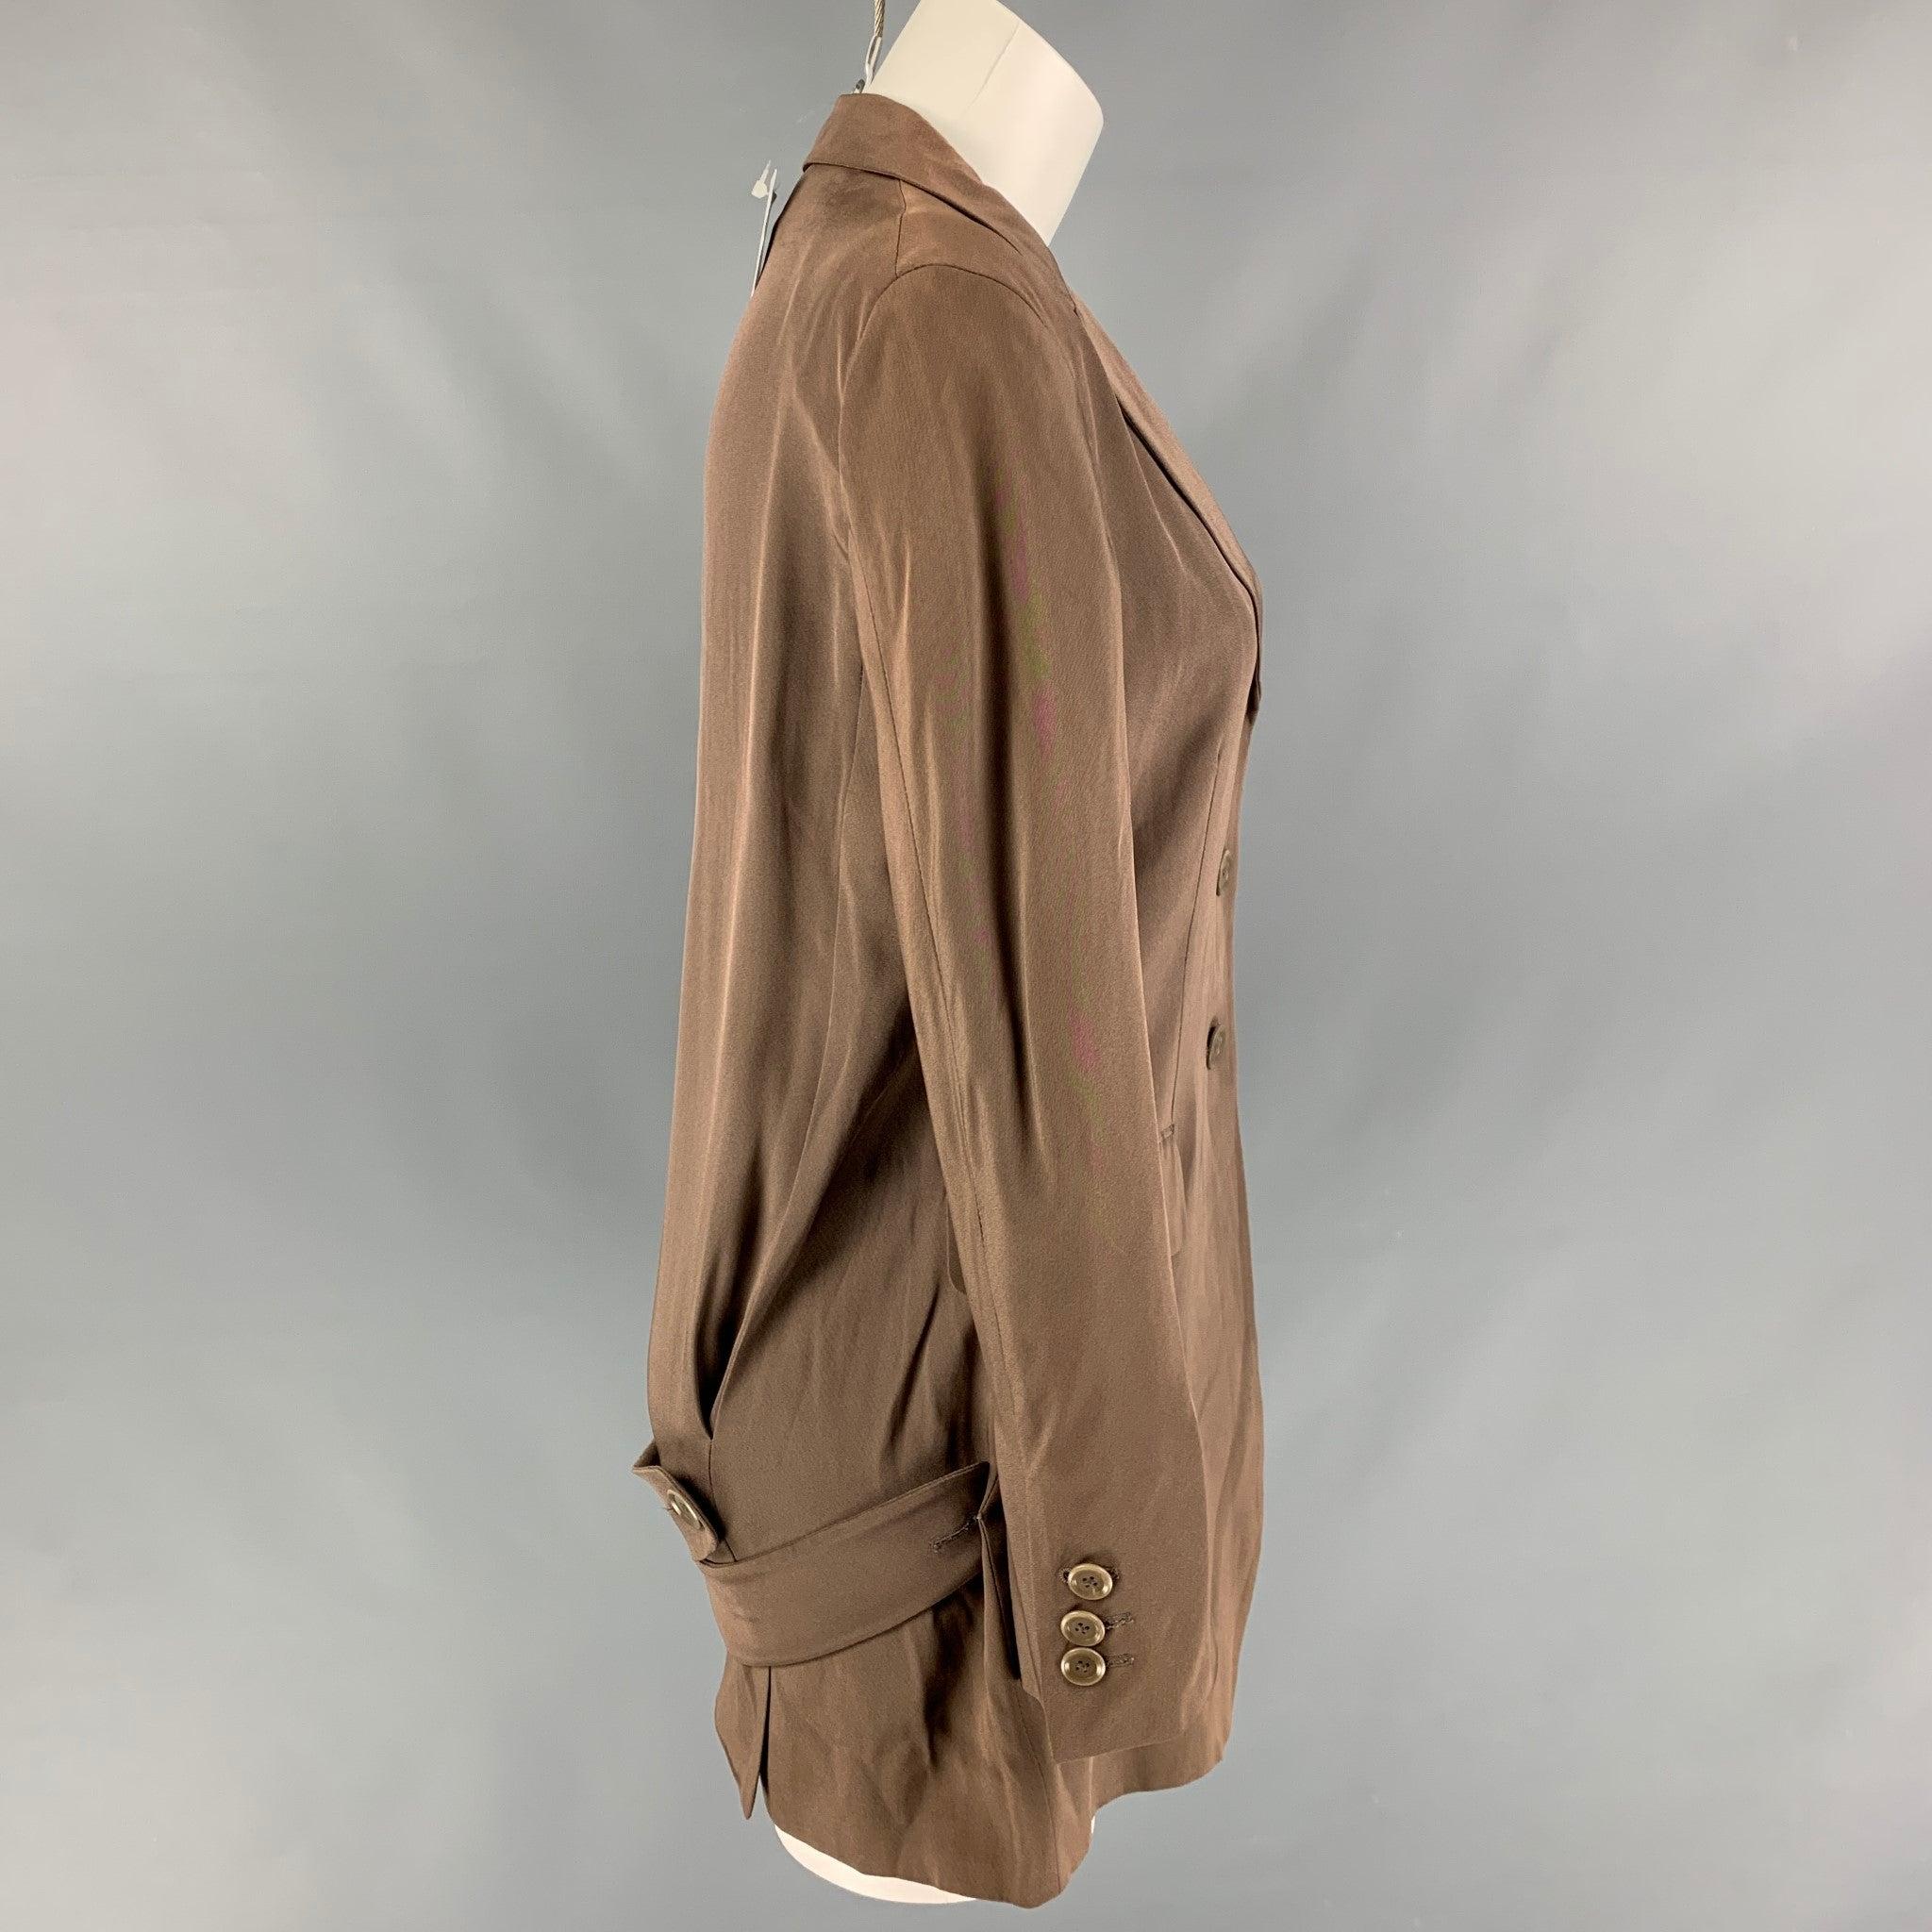 MOSCHINO blazer comes in taupe acetate blend fabric featuring notch lapel, single breast three button closure, two frontal pockets with gore, and double belt at back. Made in Italy.New With Tags 

Marked:   8 

Measurements: 
 
Shoulder: 16.5 inches